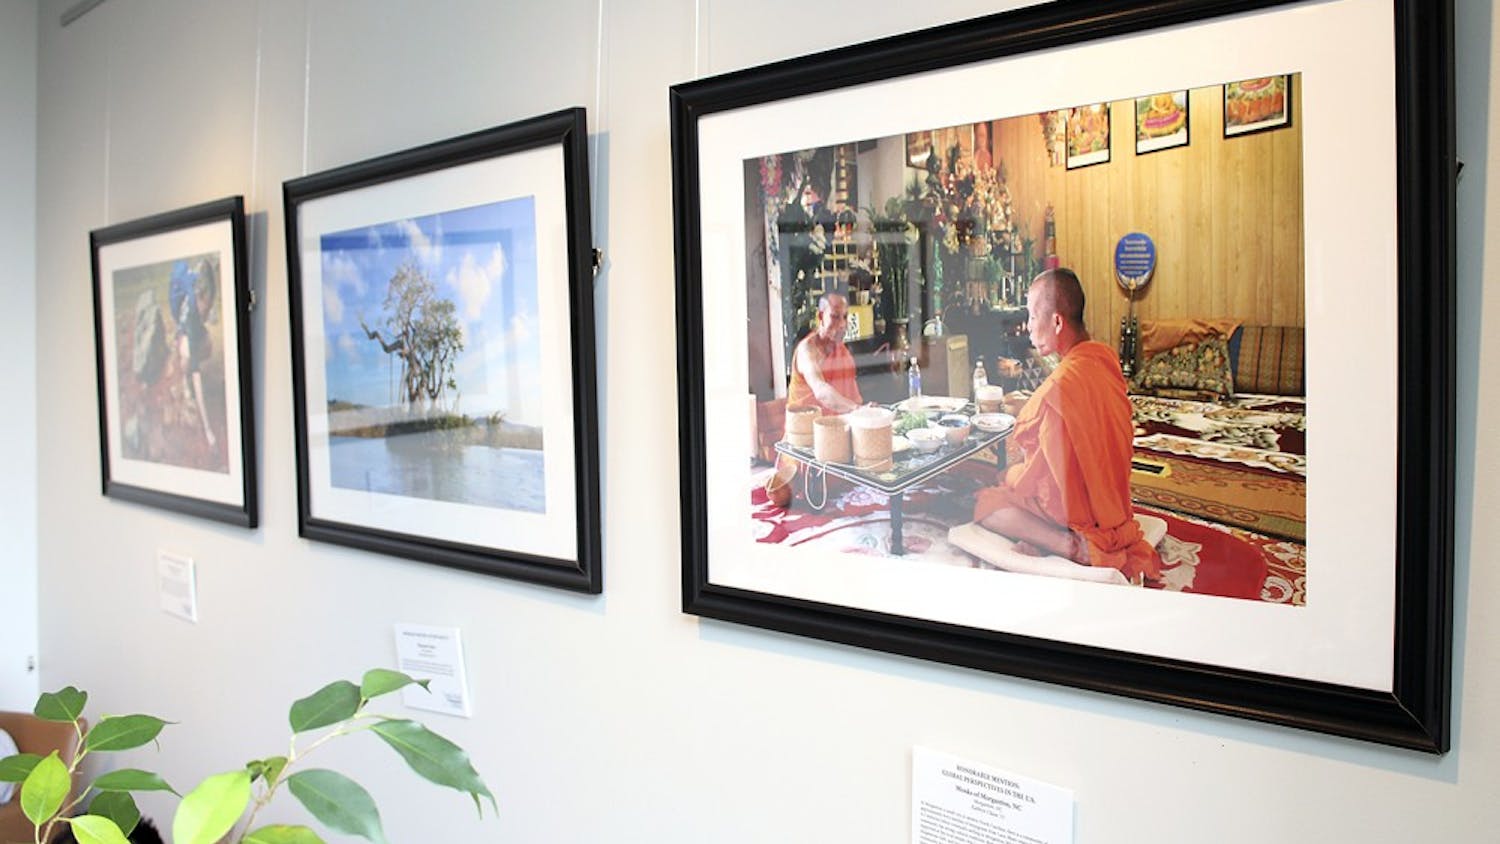 The 2015 Carolina Global Photography Exhibition is on display until July 31 in the FedEx Global Education Center. 